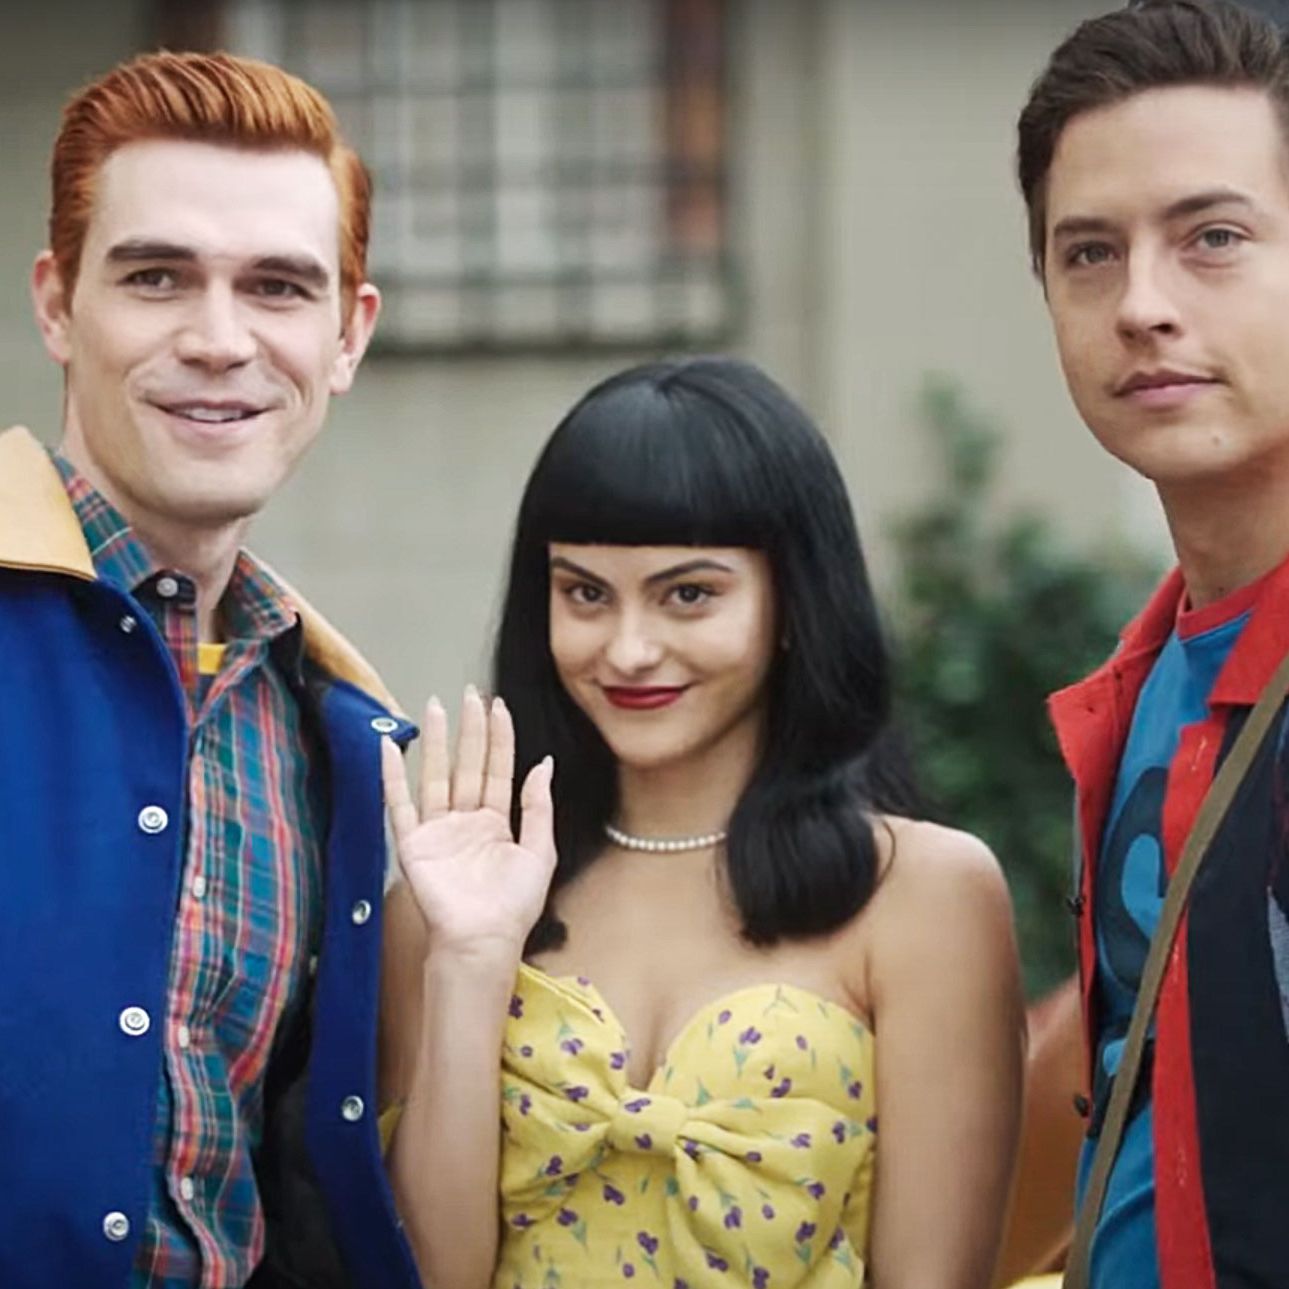 Riverdale's Series Finale: Betty Cooper Is The Main Character